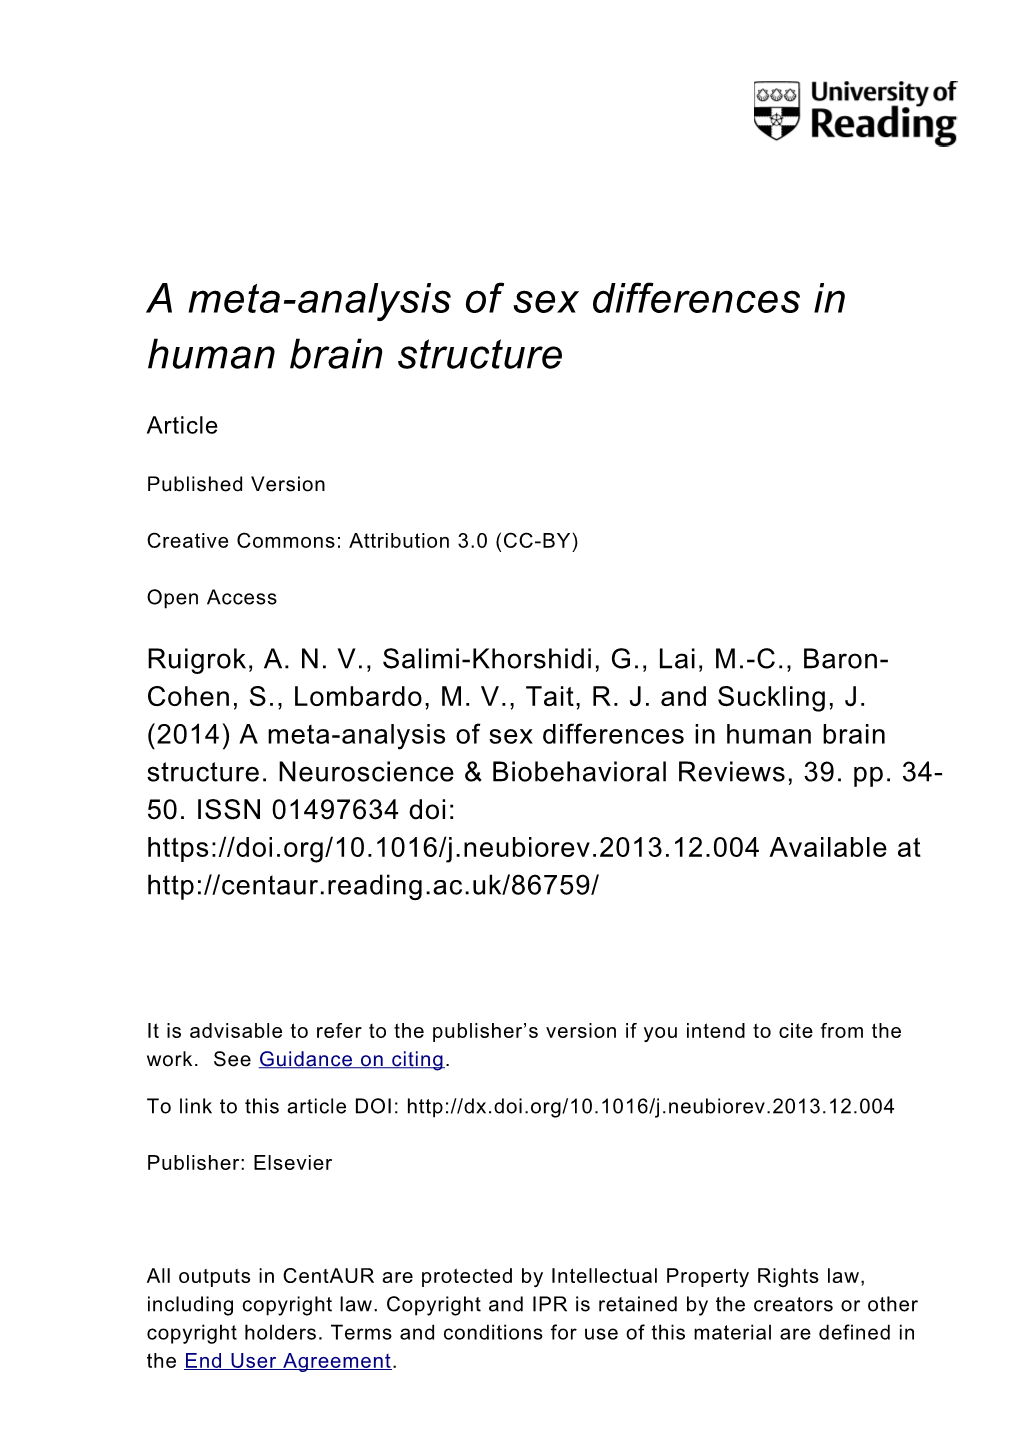 A Meta-Analysis of Sex Differences in Human Brain Structure